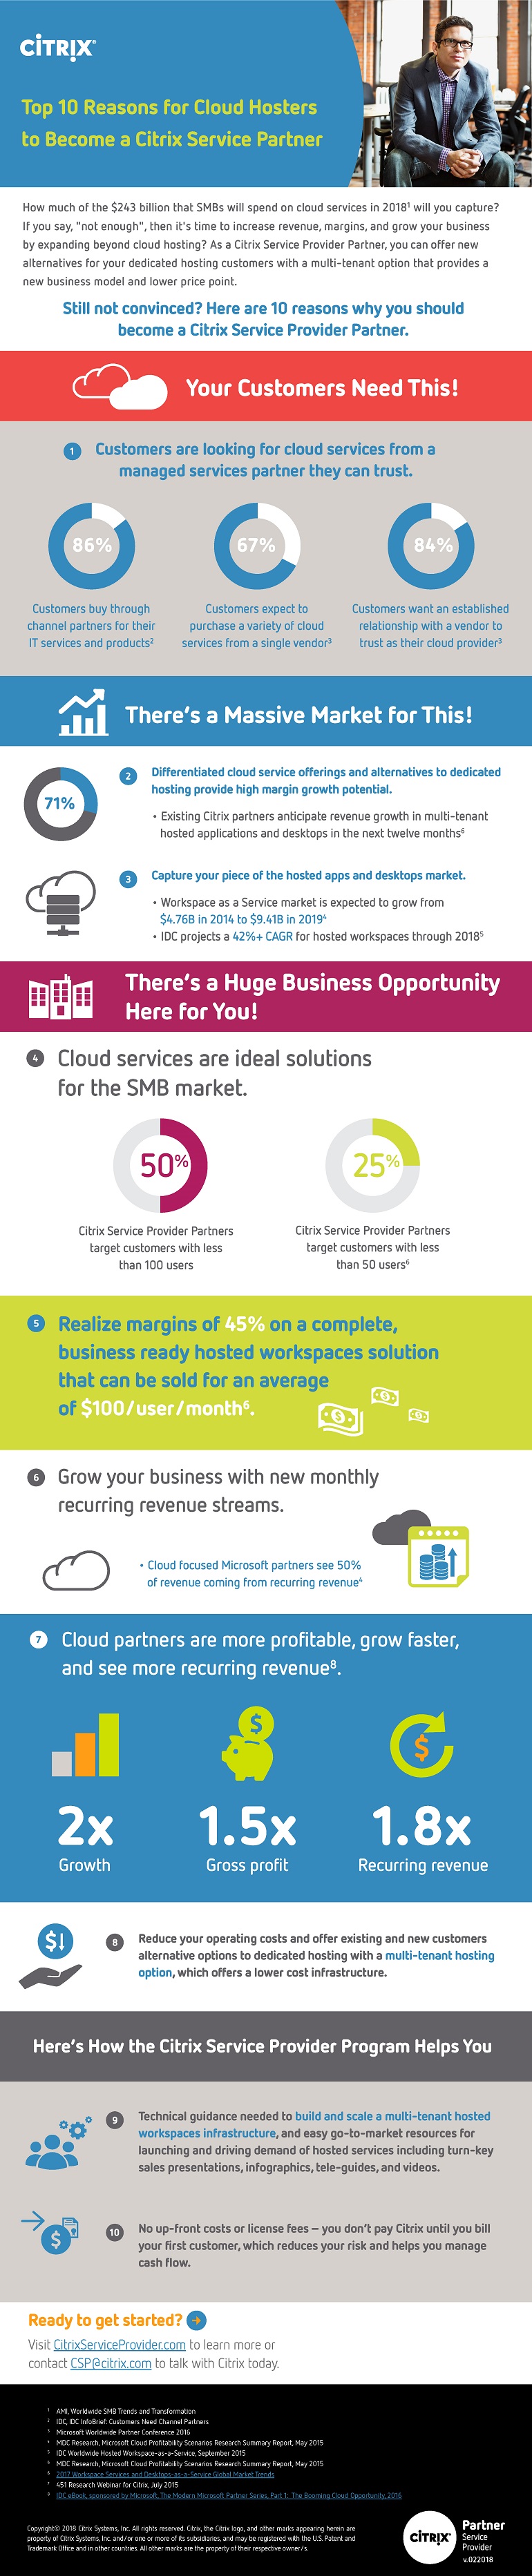 Top 10 Reasons to be a Citrix Service Provider